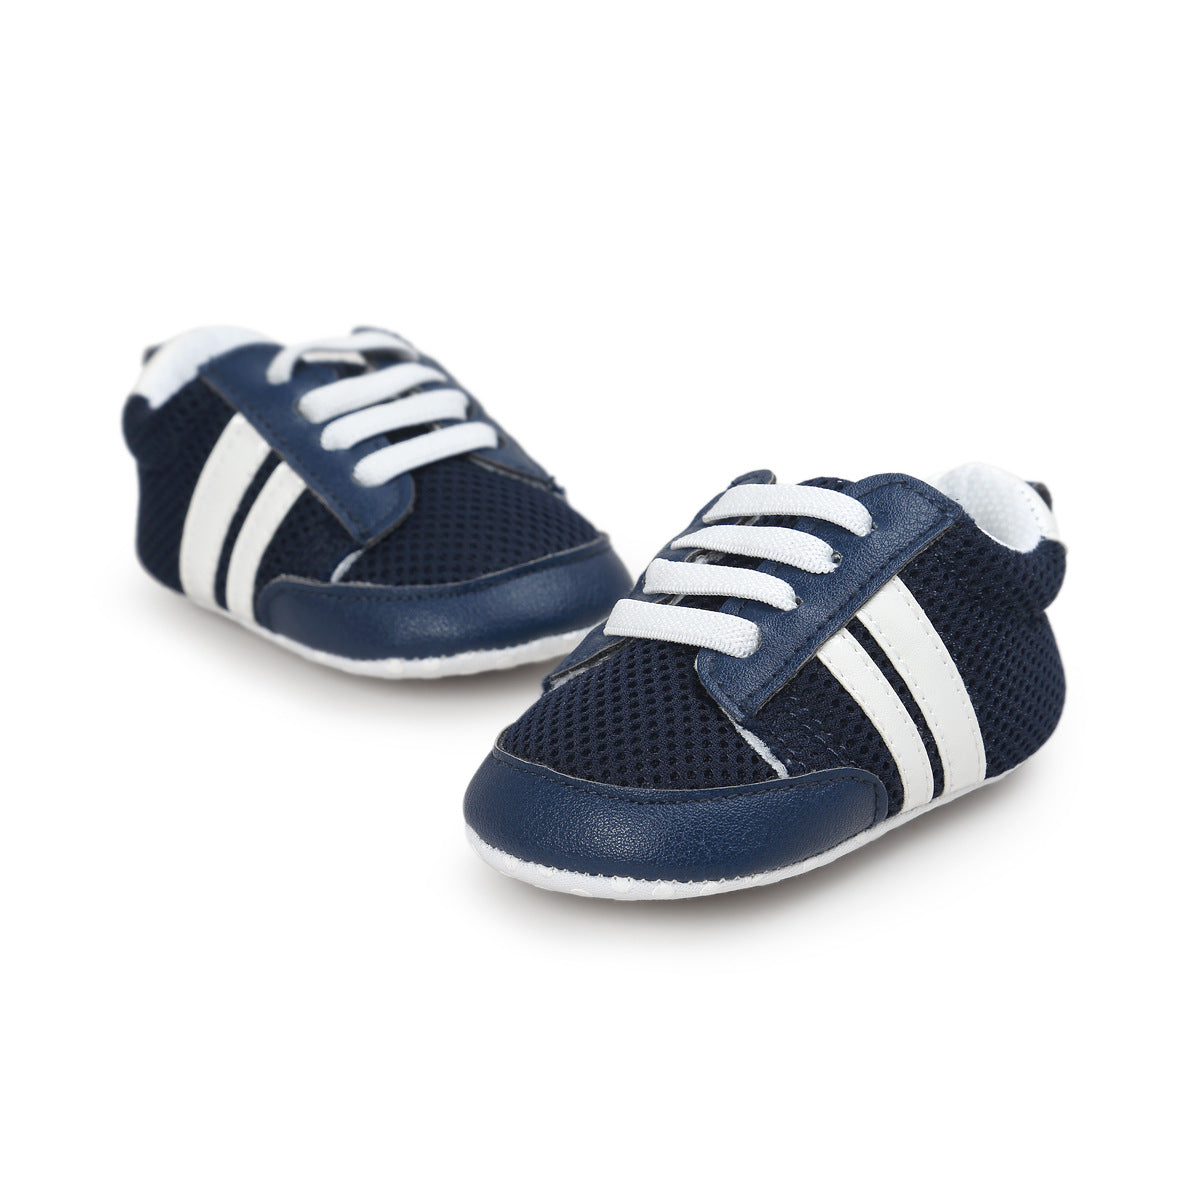 Baby Boys and Girls Non-slip Moccasin Soft Sneaker